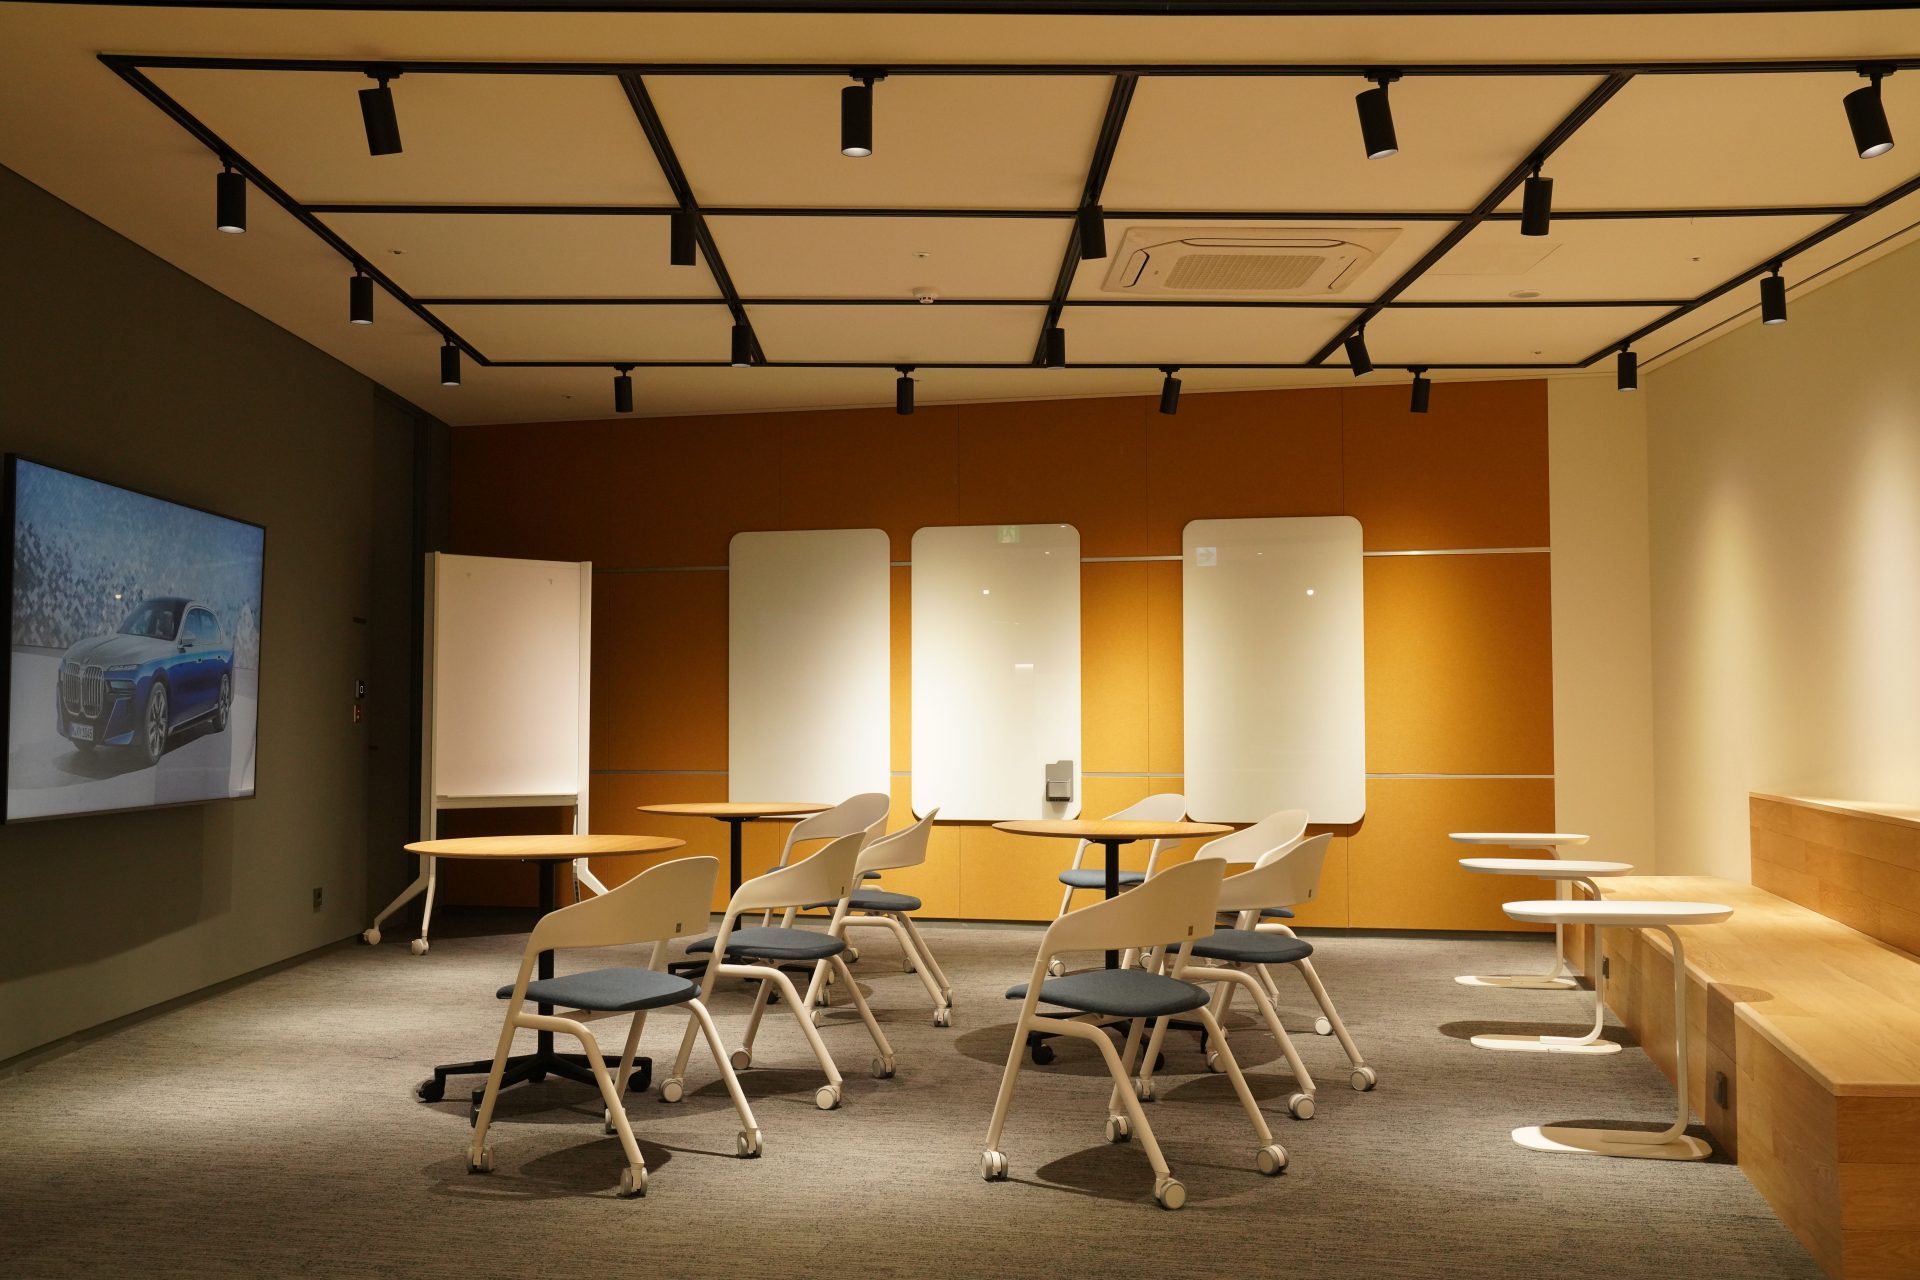 The image shows a meeting room at BMW Group Korea.